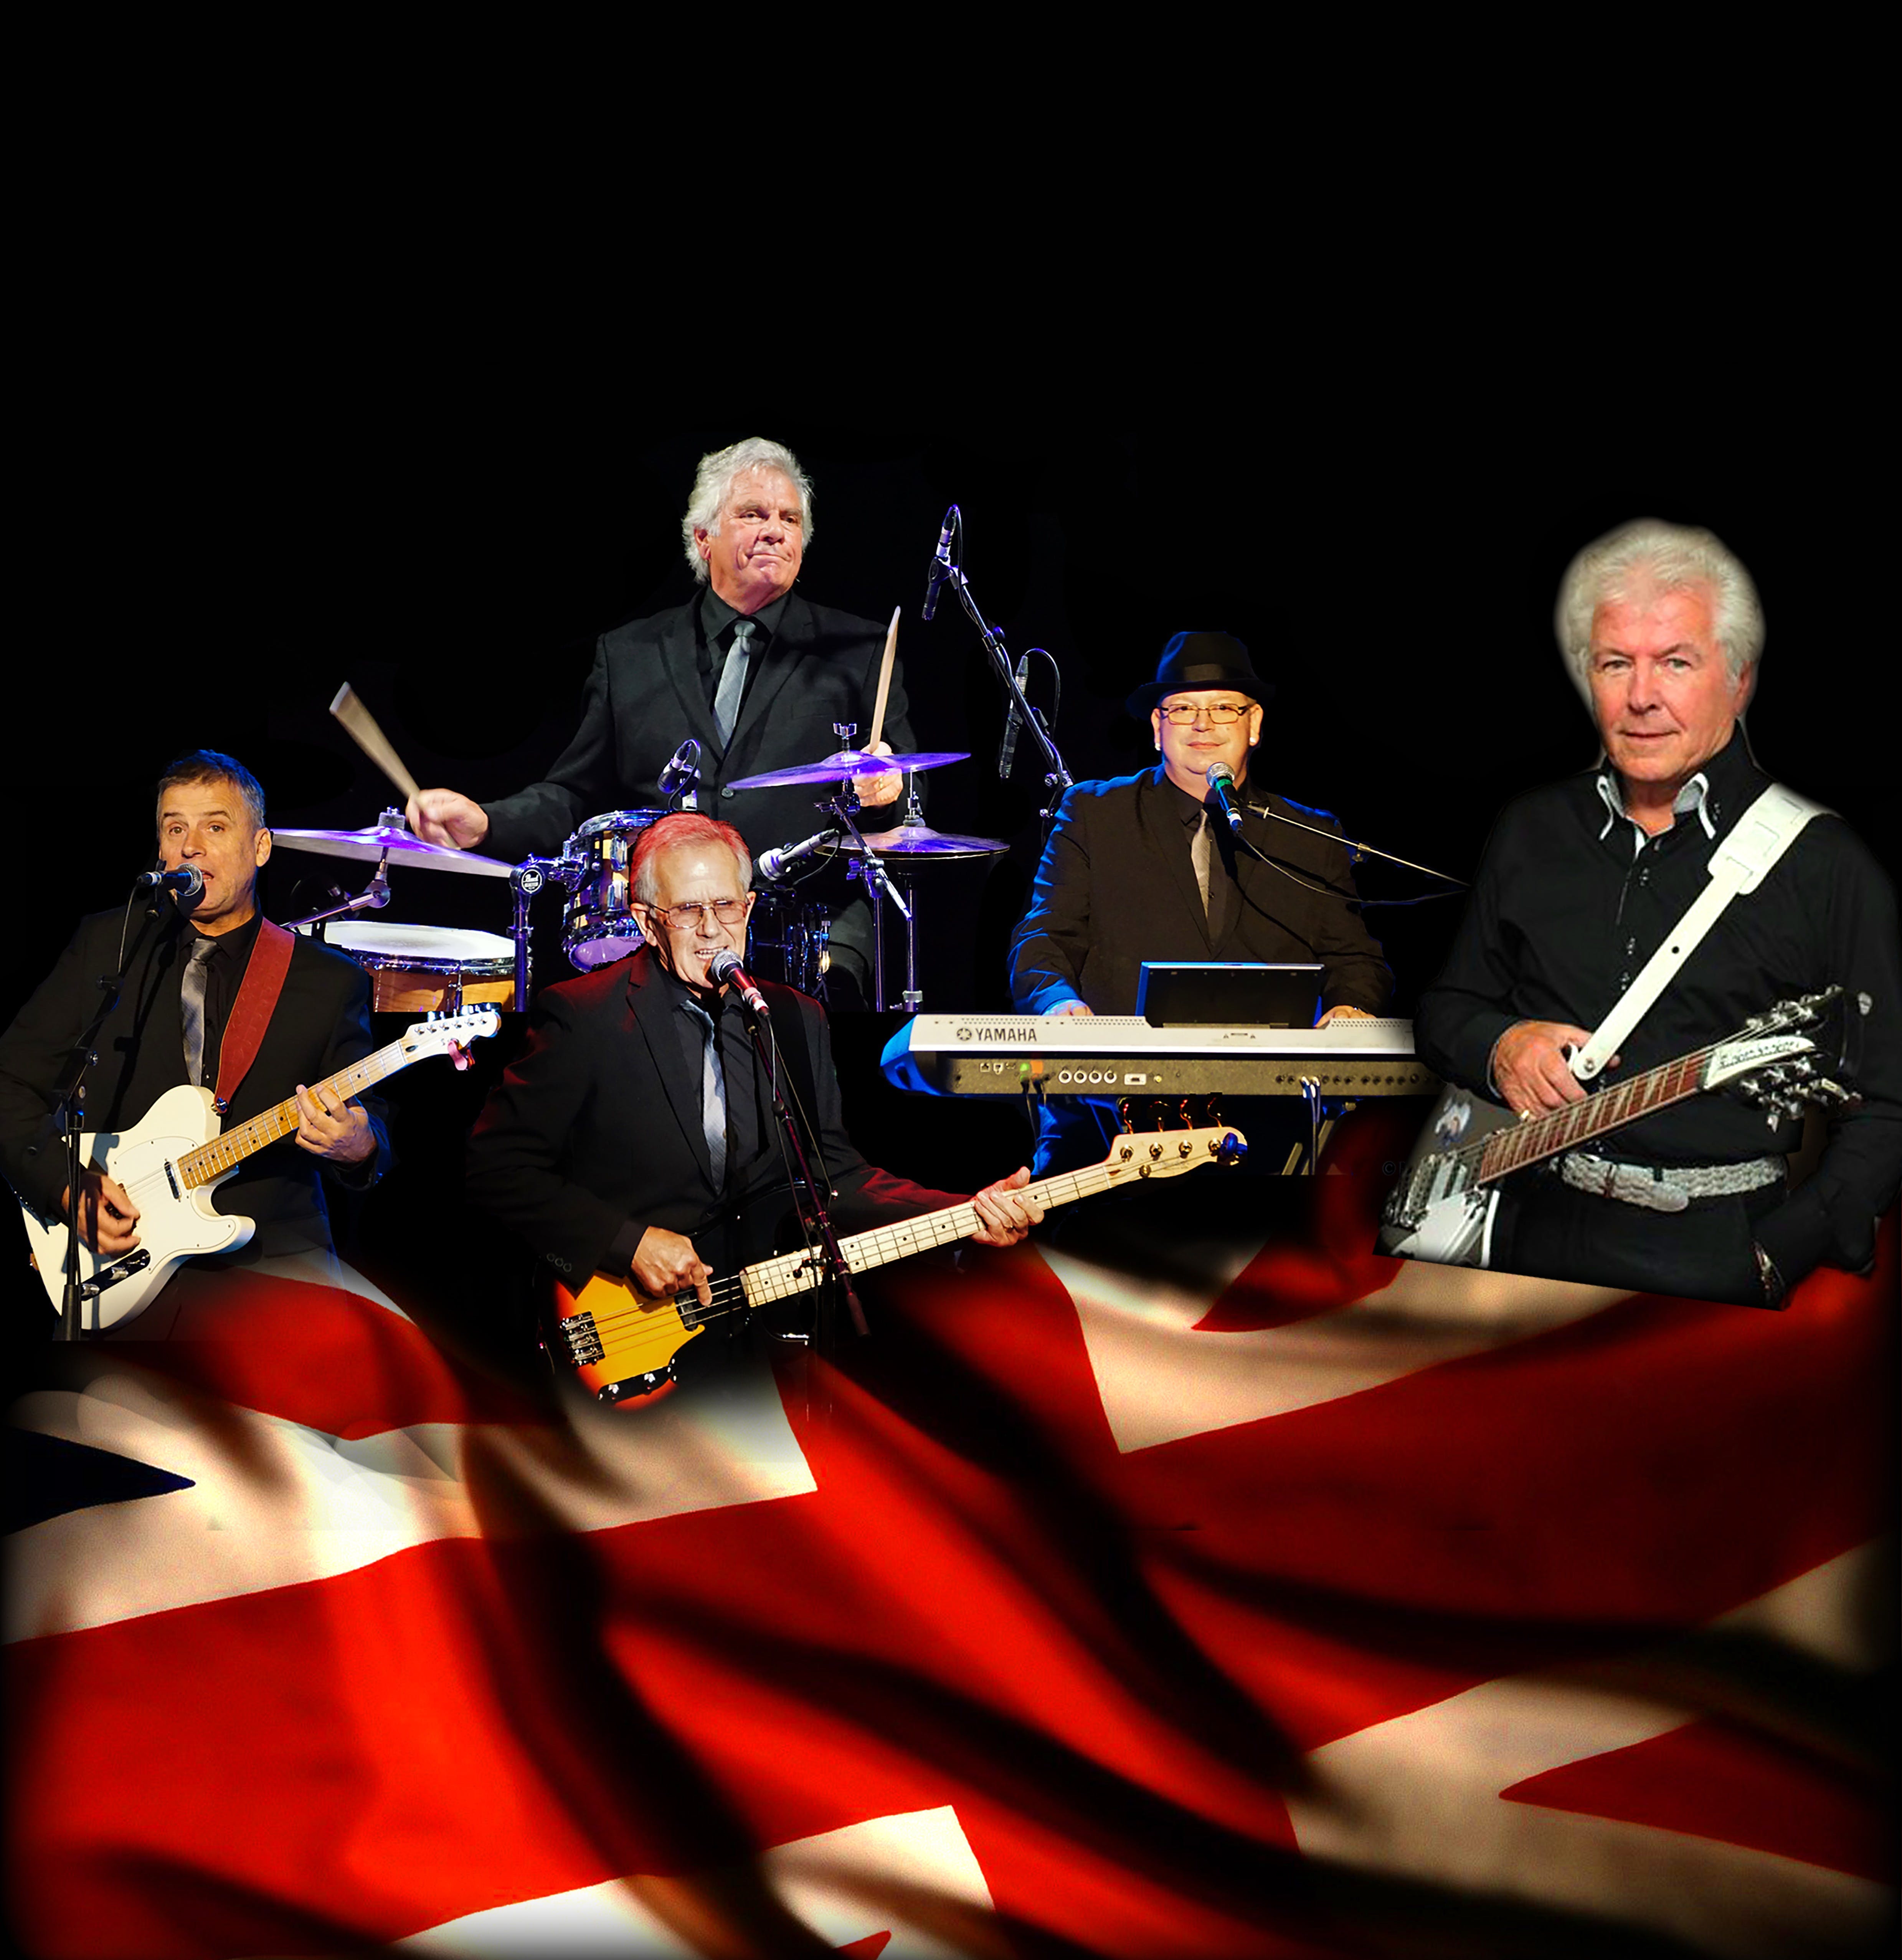 Herman's Hermits with Special Guest Mike Pender - The Six O'Clock Hop - eAccommodation